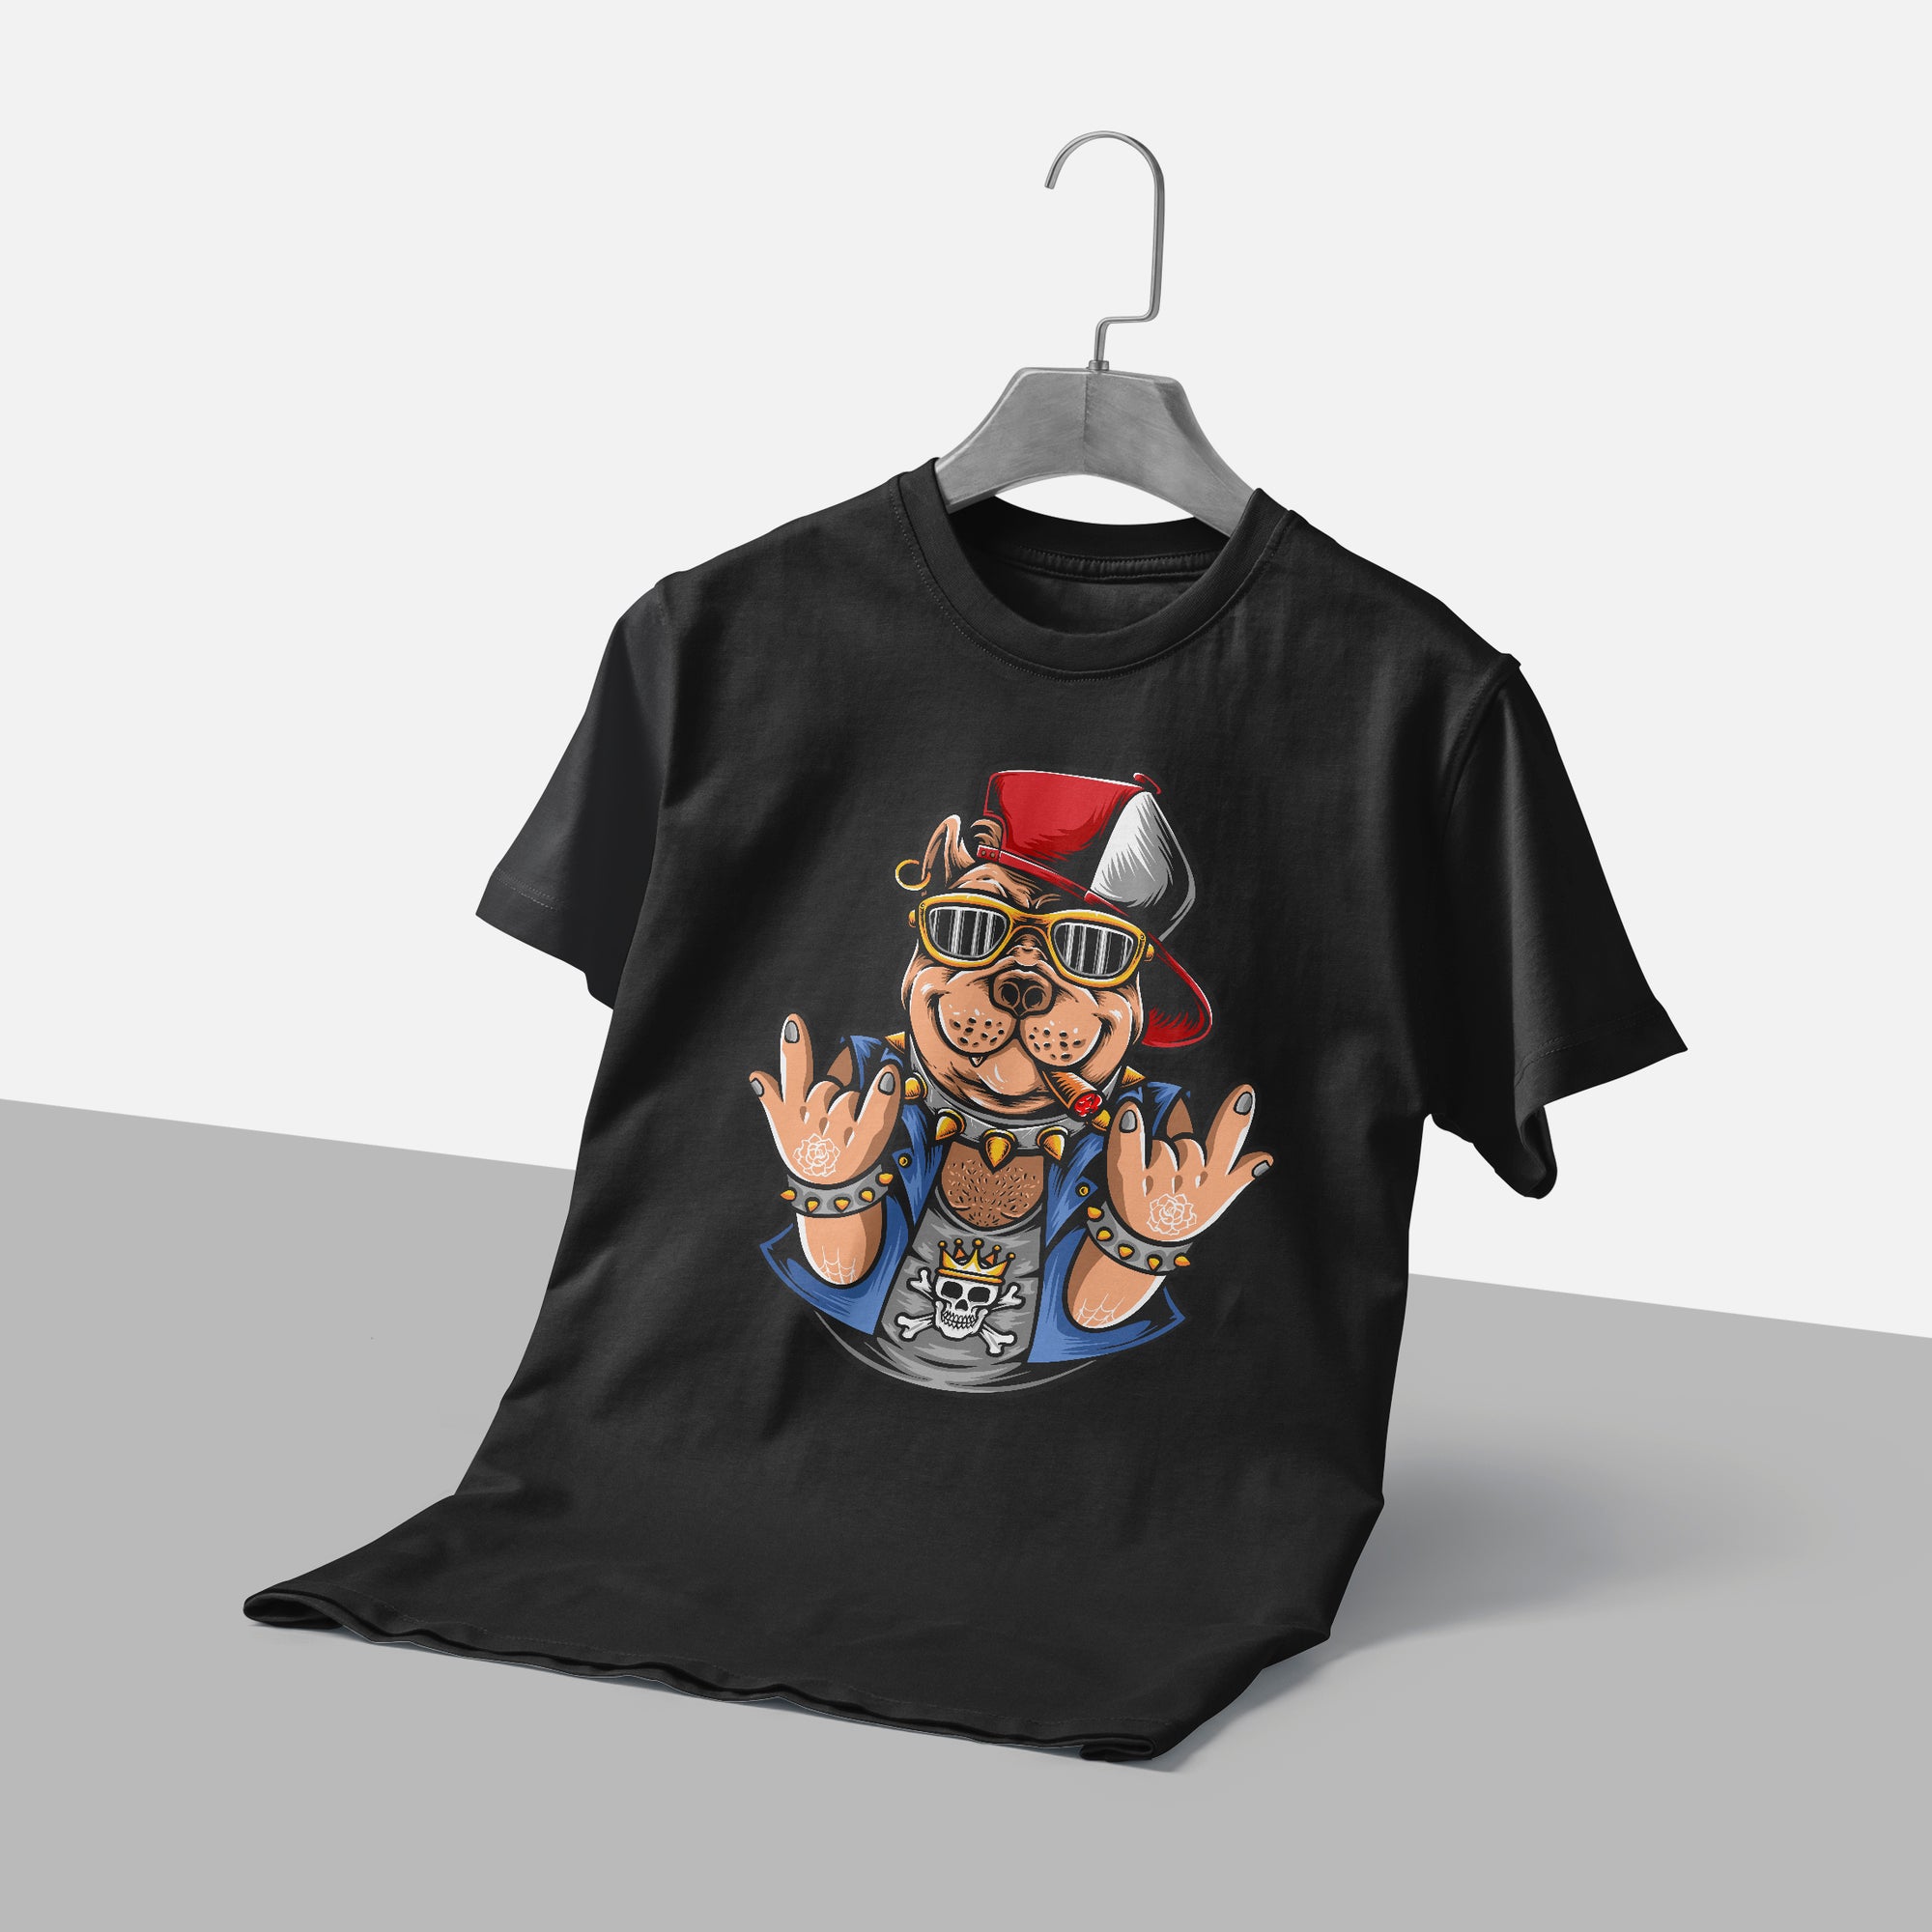 Pitbull in a Hip Hop Outfit T-Shirt